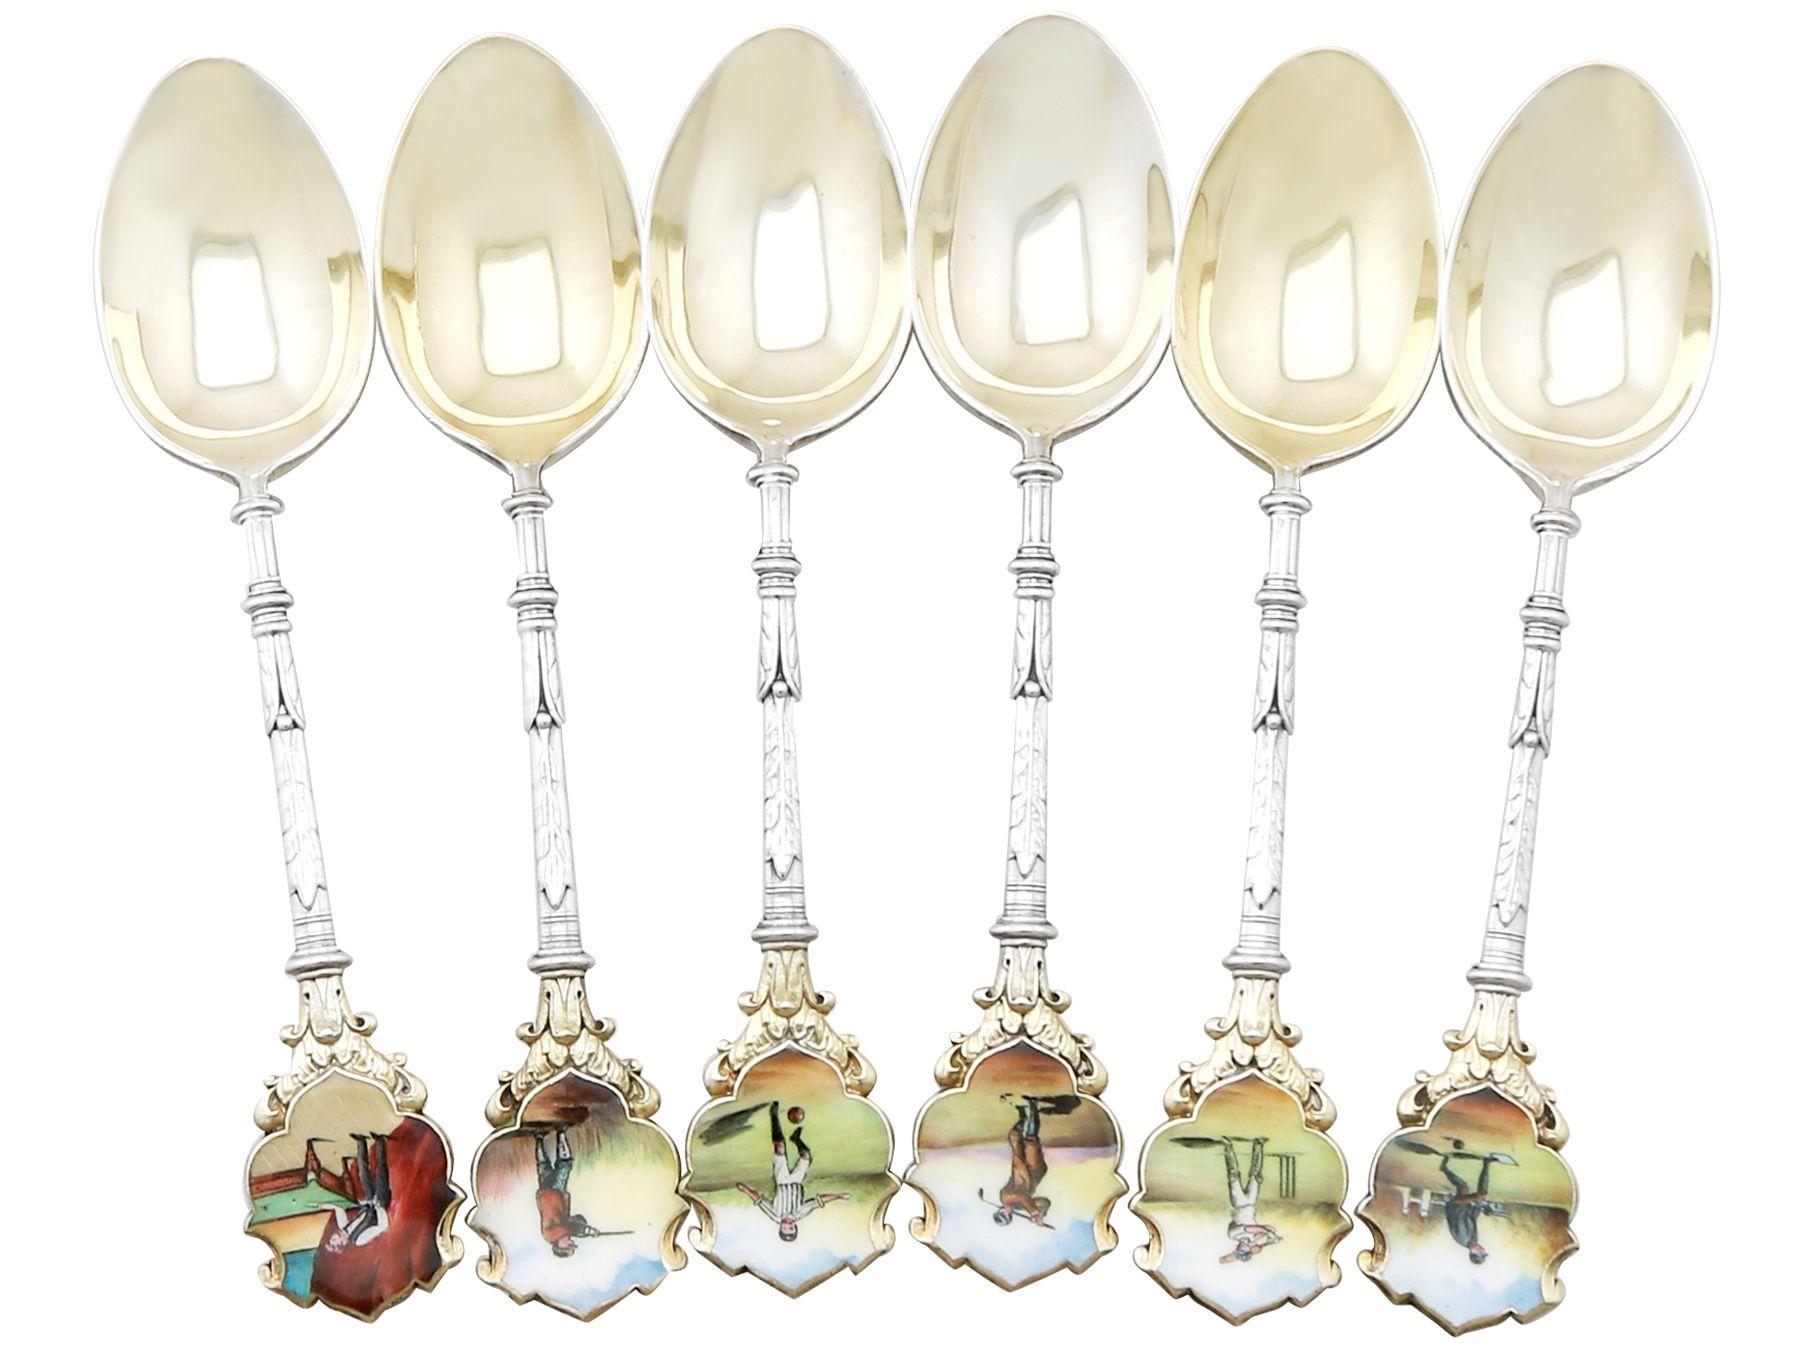 An exceptional, fine and impressive set of six antique Edwardian English sterling silver and enamel spoons; an addition to our silver teaware collection

These exceptional antique Edwardian English sterling silver spoons have a plain rounded